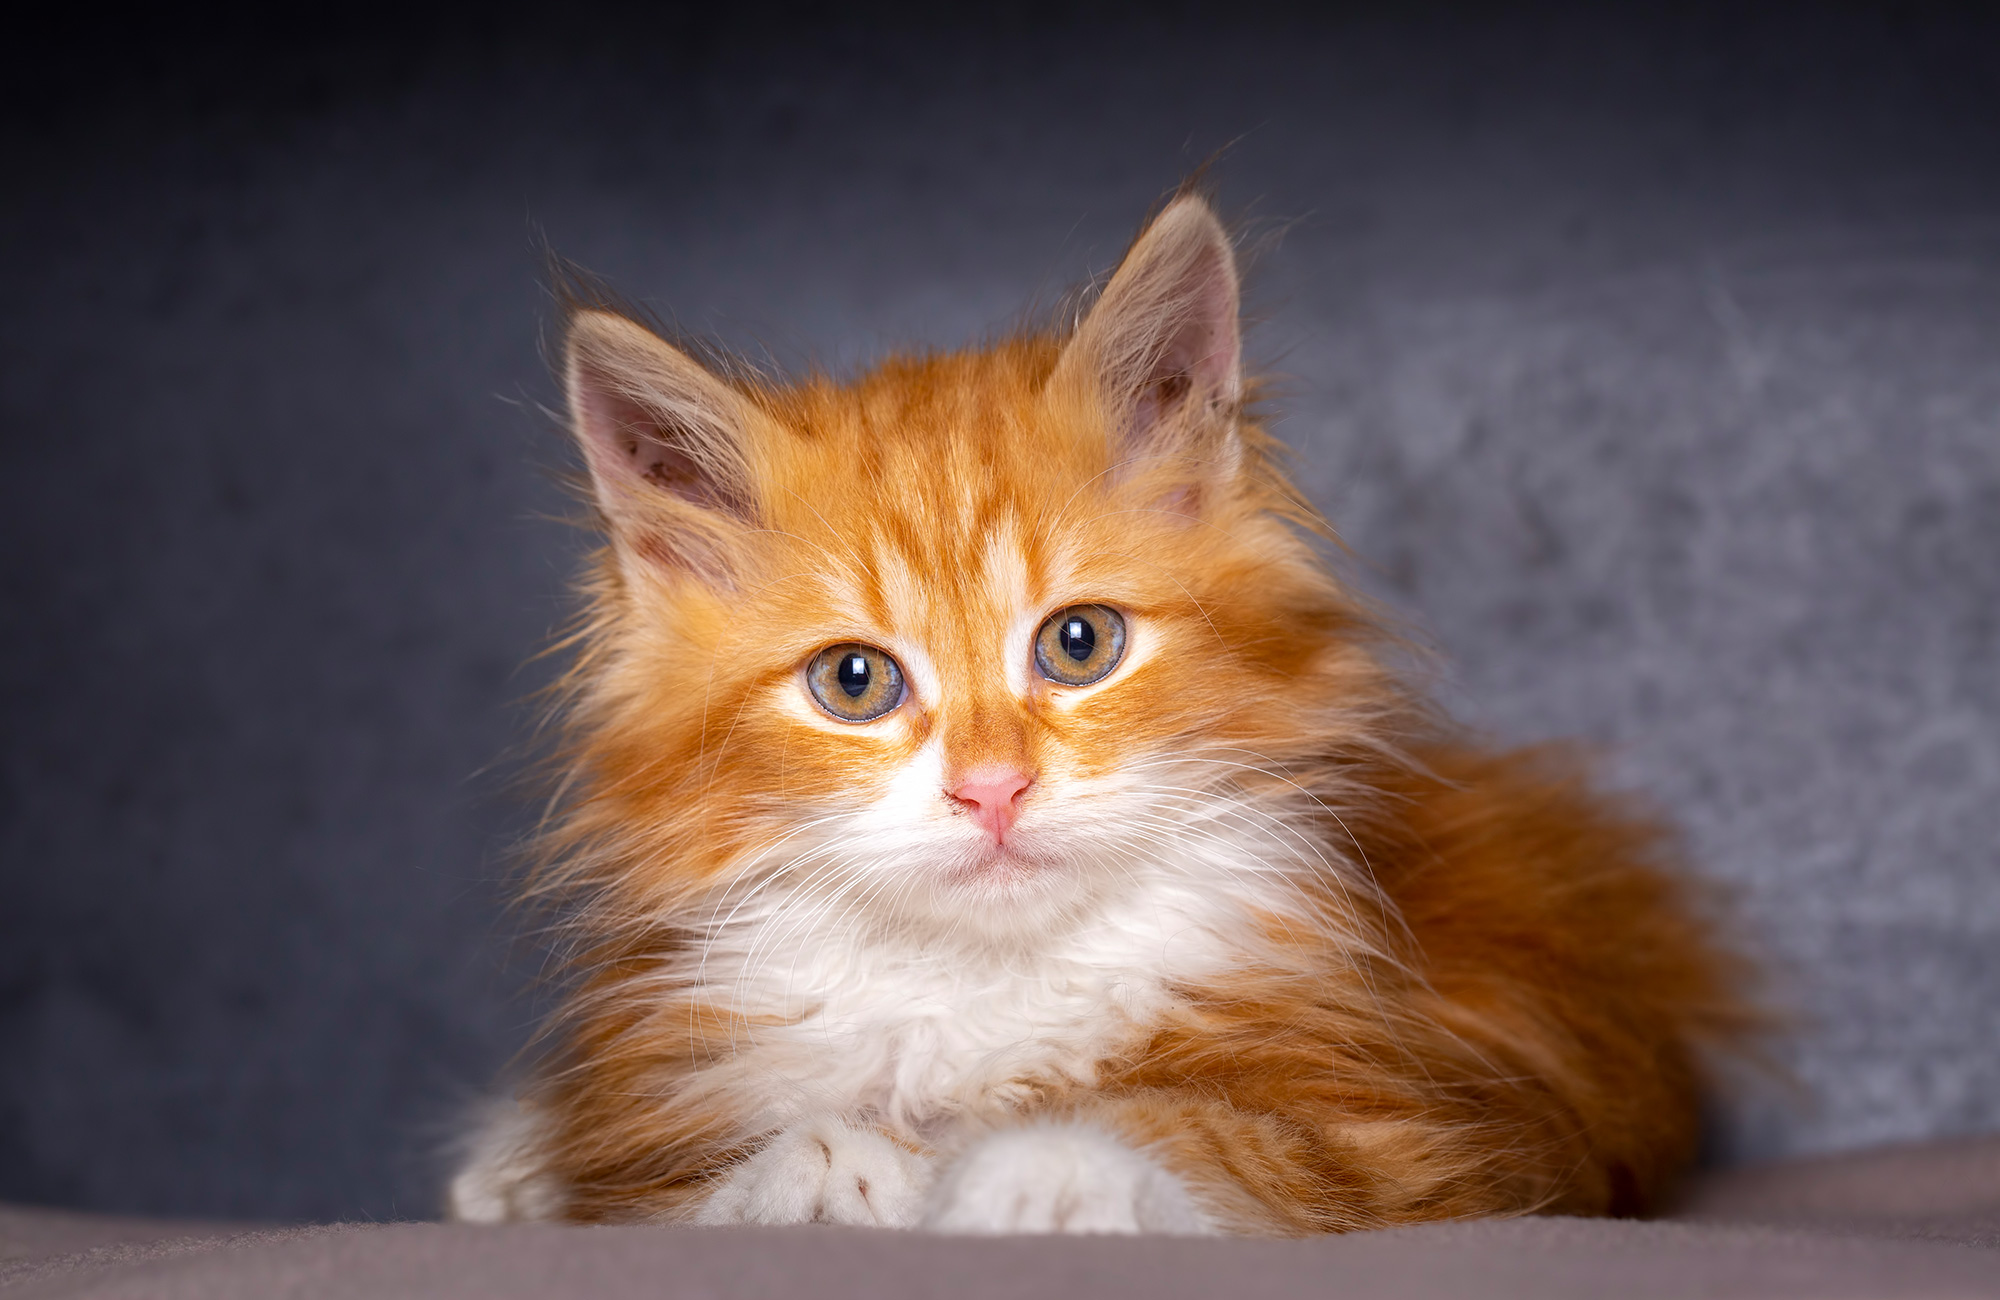 What are the Fluffiest Cat Breeds?